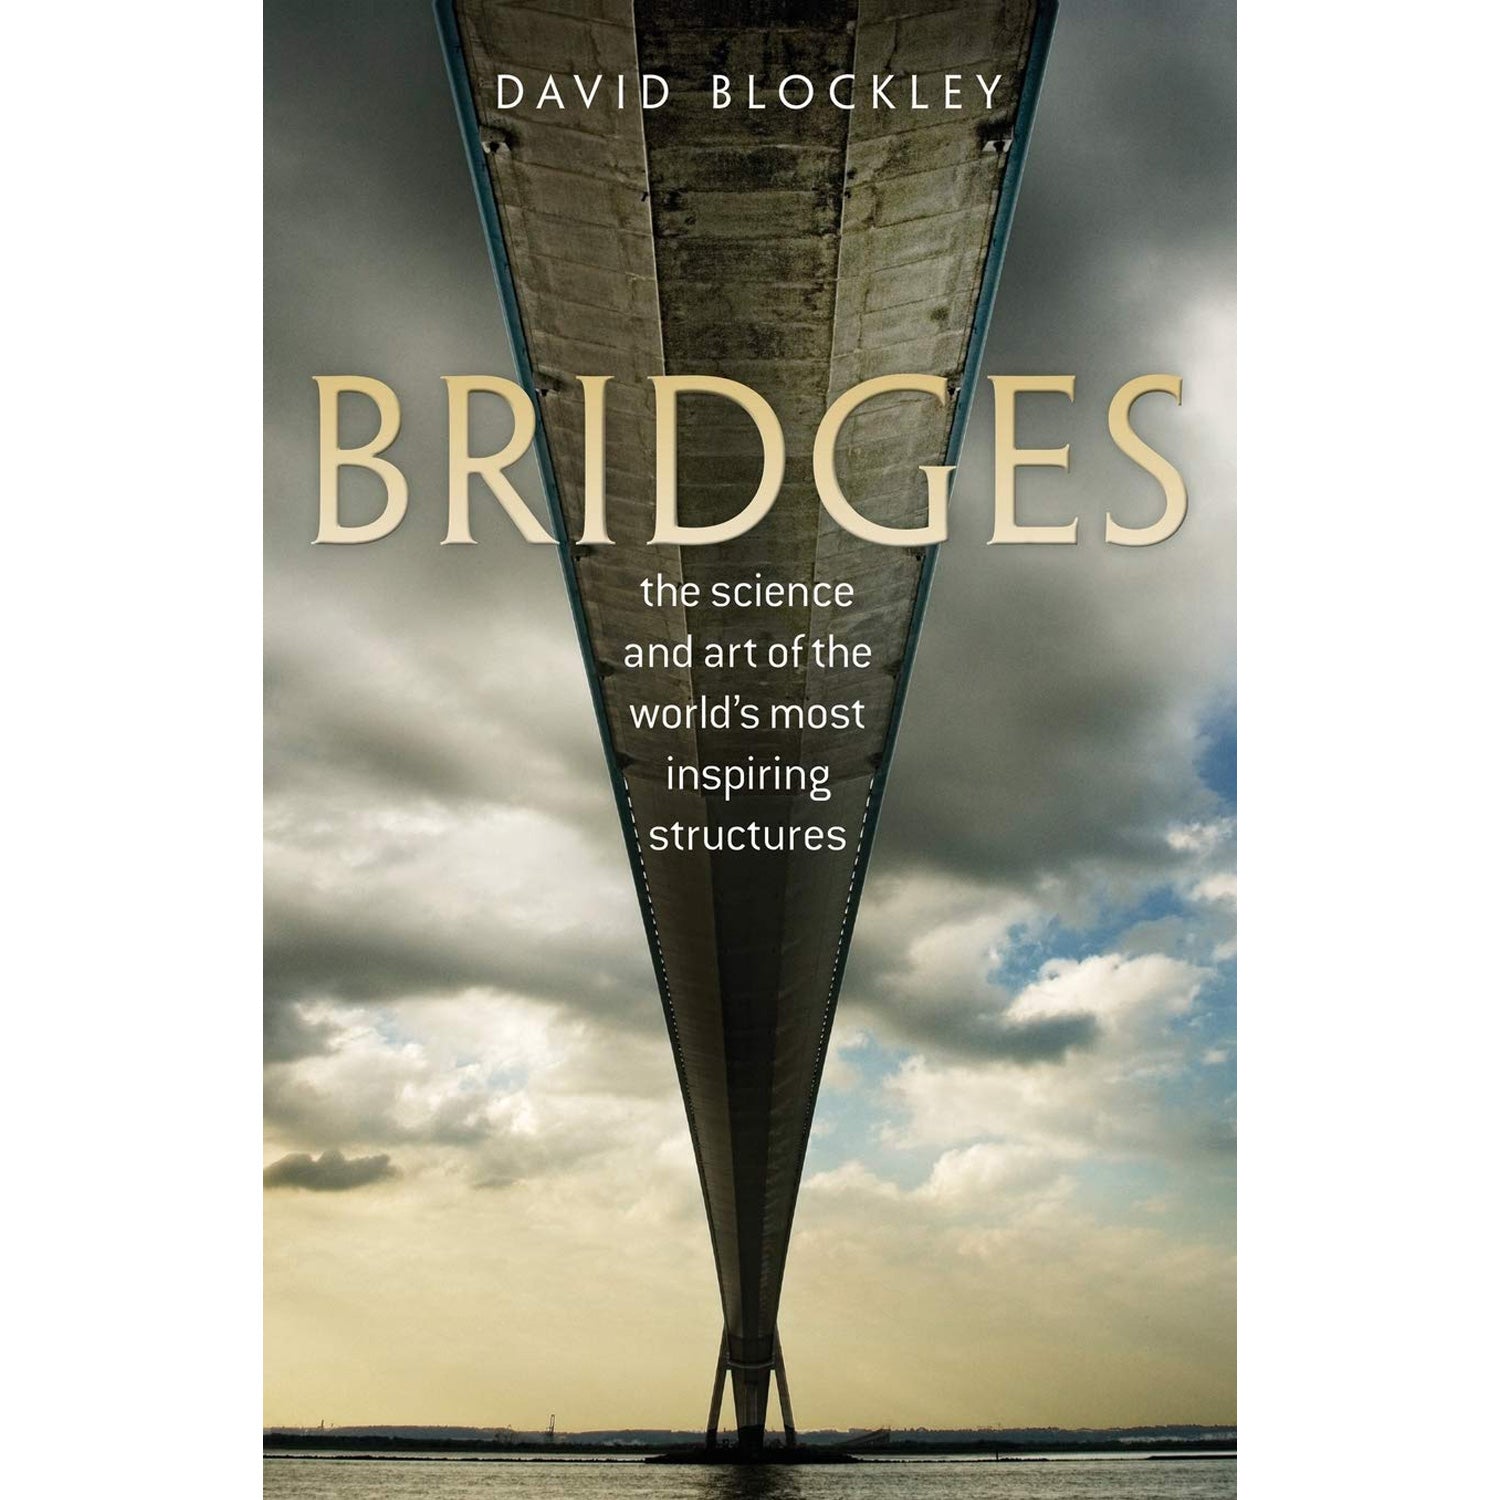 Bridges: The Science And Art Of The World's Most Inspiring Structures Book By David Blockley